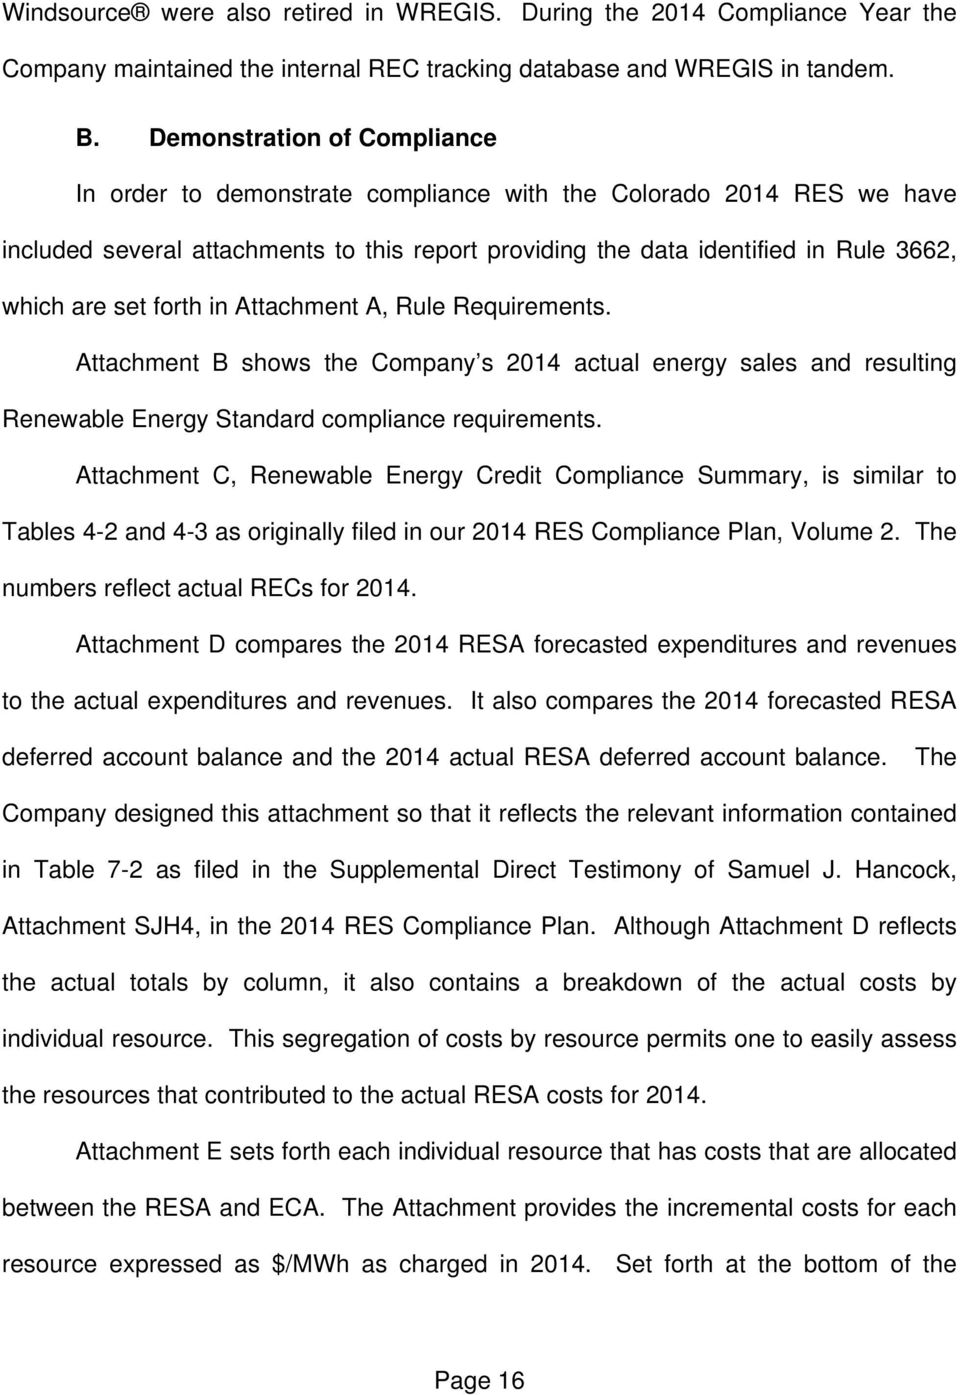 forth in Attachment A, Rule Requirements. Attachment B shows the Company s 2014 actual energy sales and resulting Renewable Energy Standard compliance requirements.